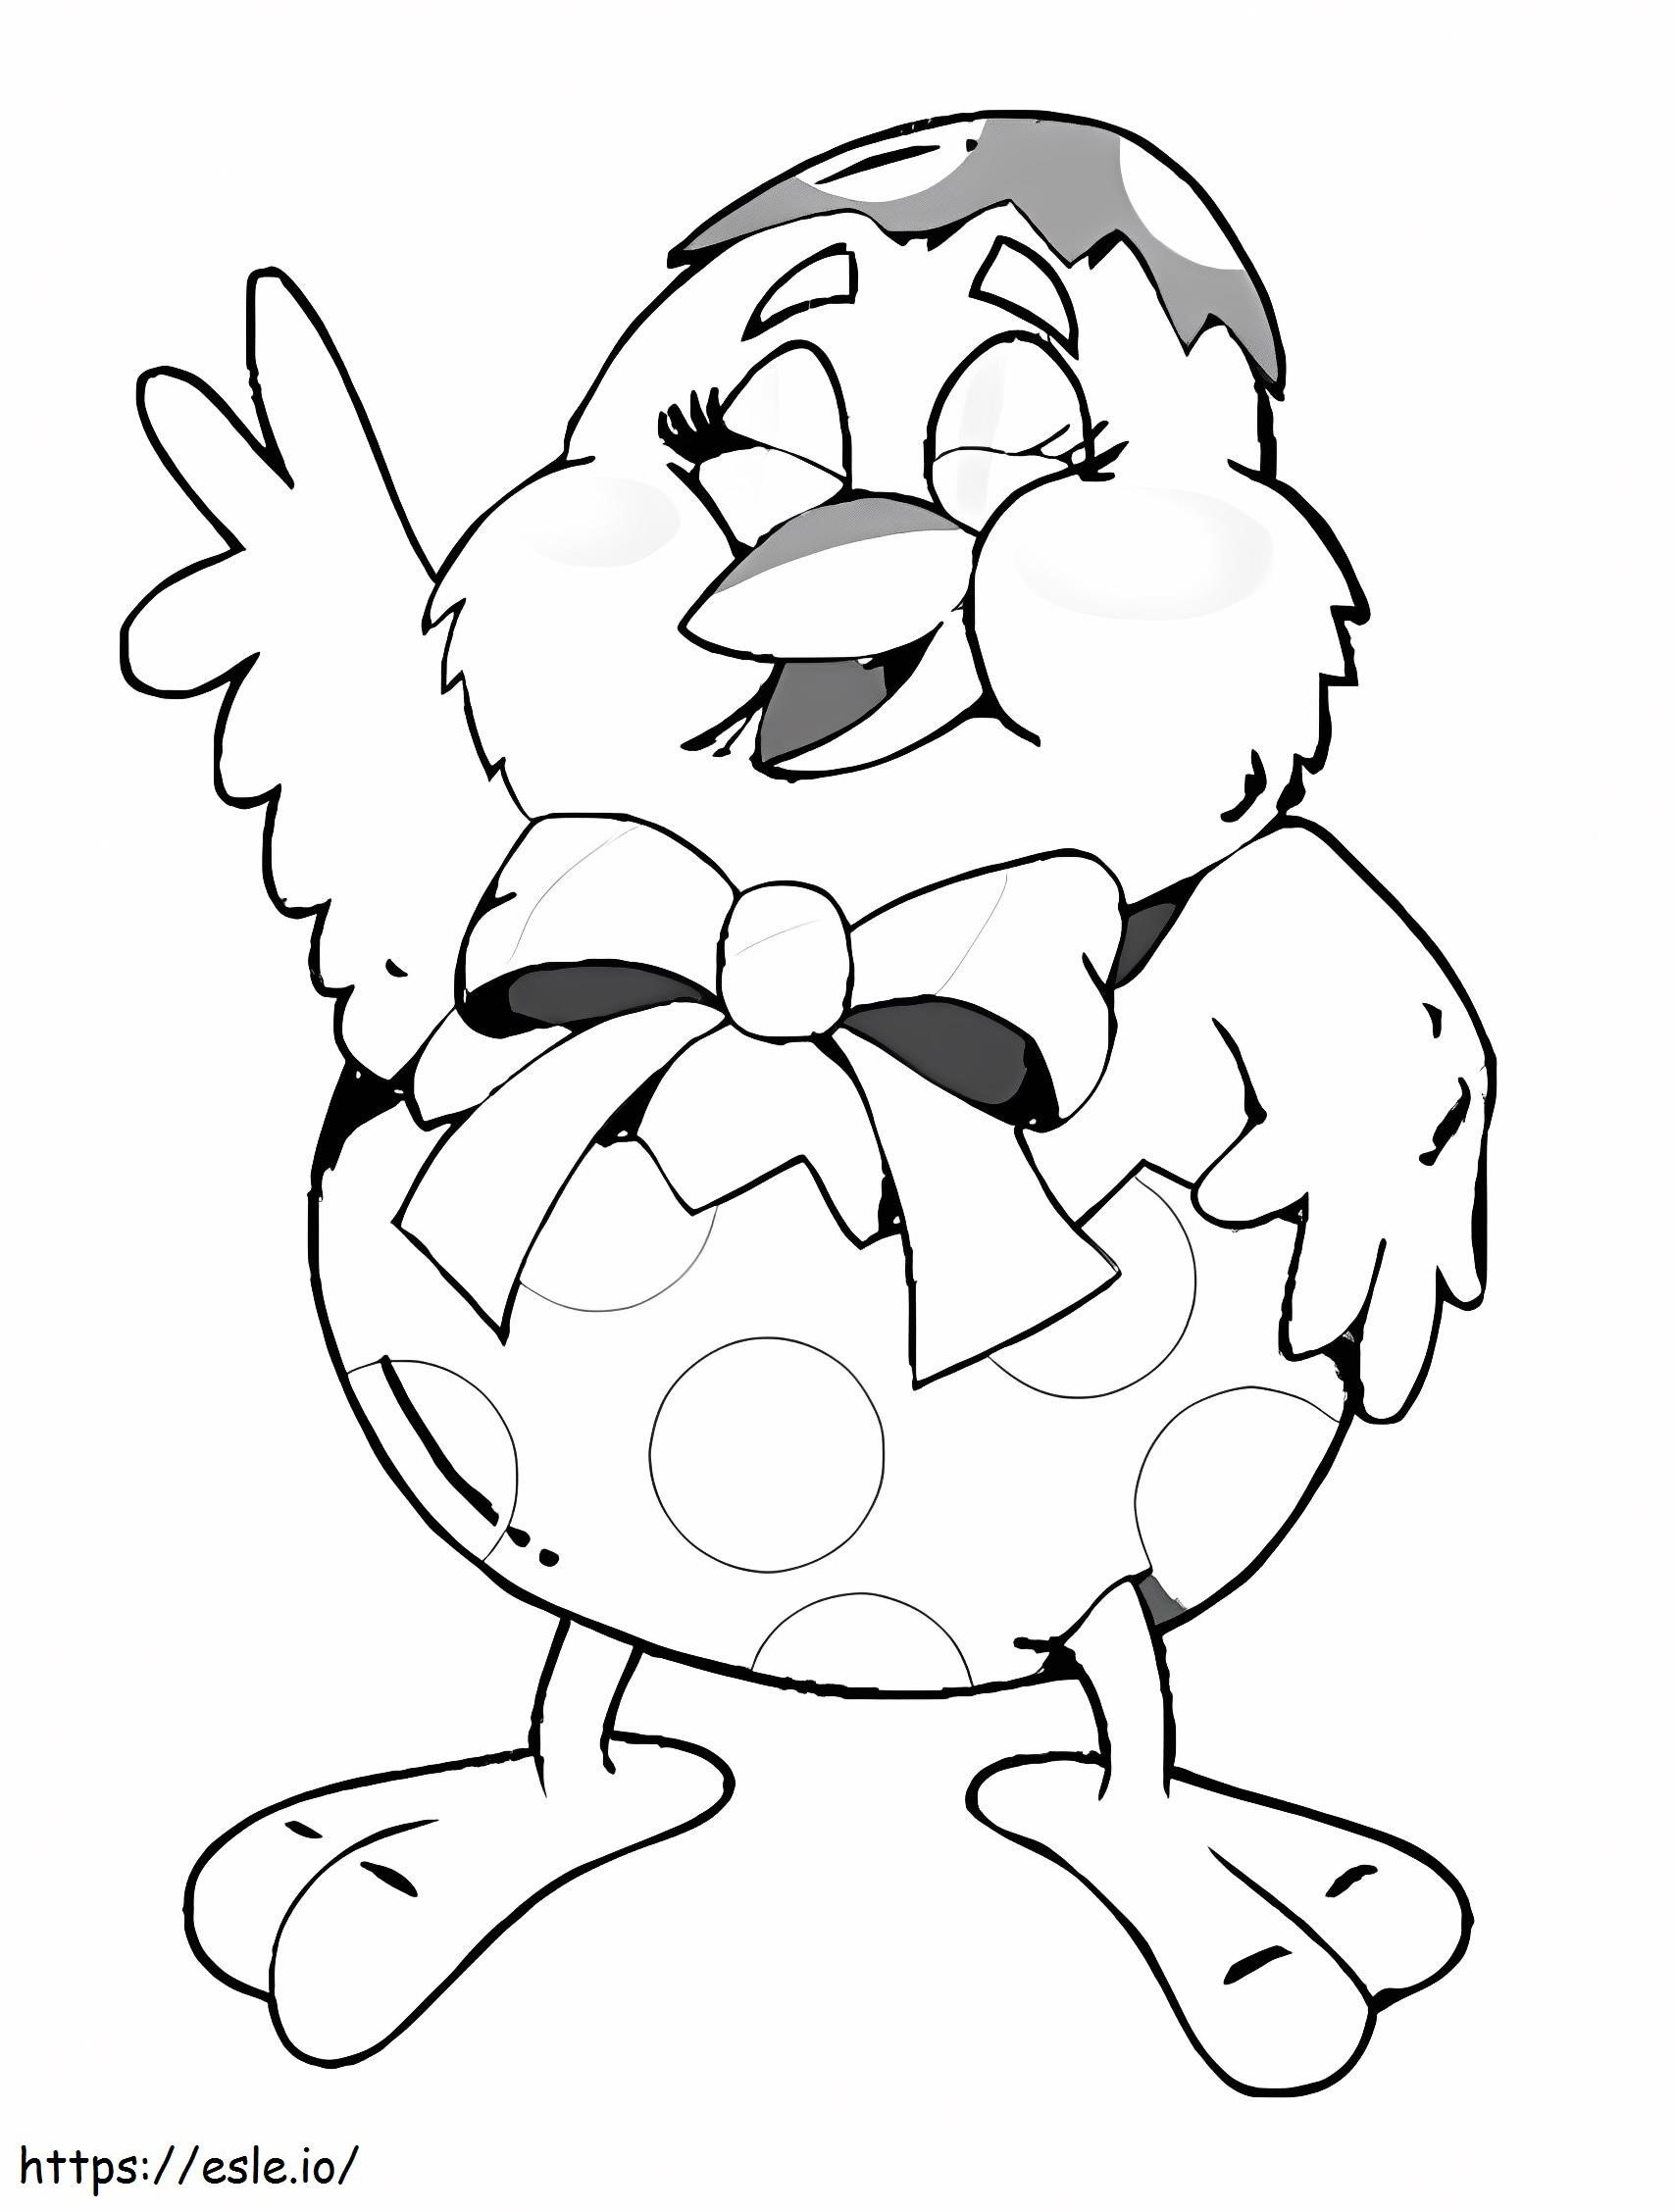 Easter Chick Laughing coloring page